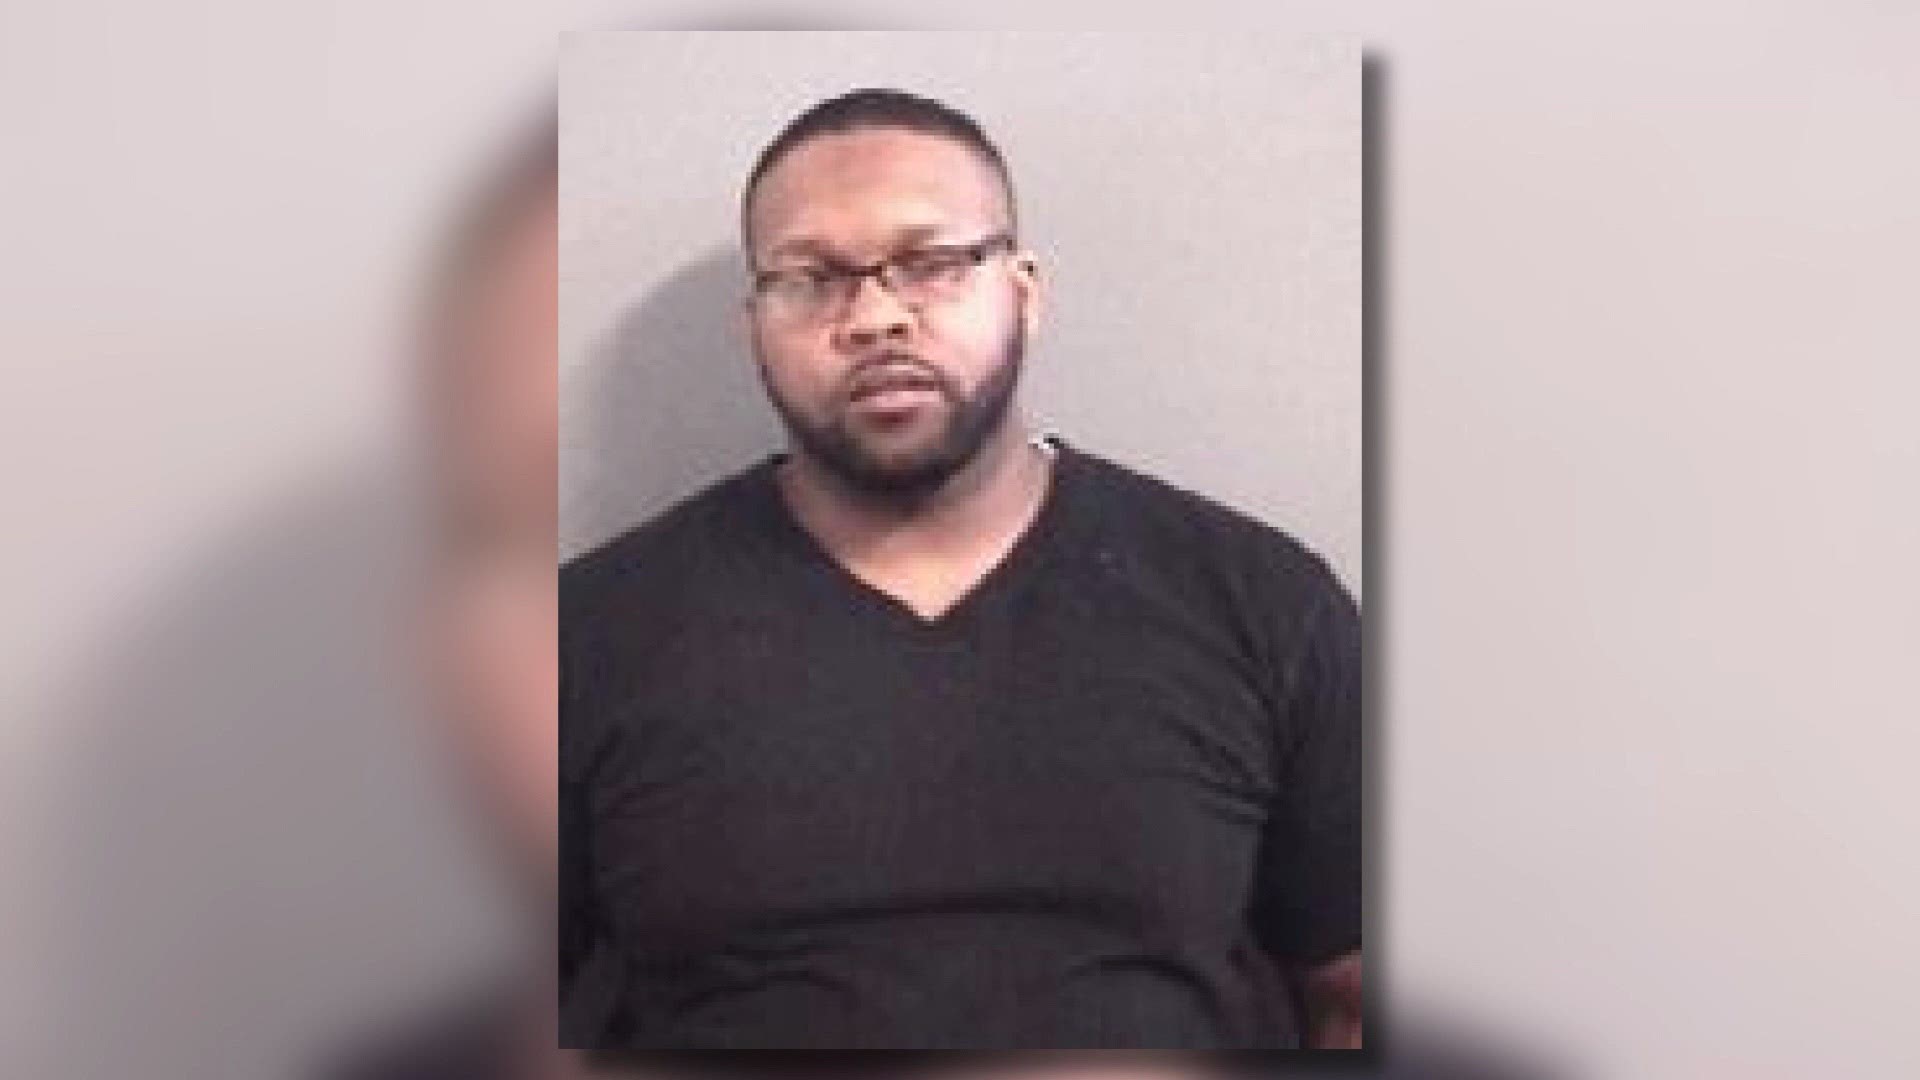 Police in Wilson, NC arrested a man who posed as a law enforcement officer during an October chase and traffic stop that led to the arrests of five other men.